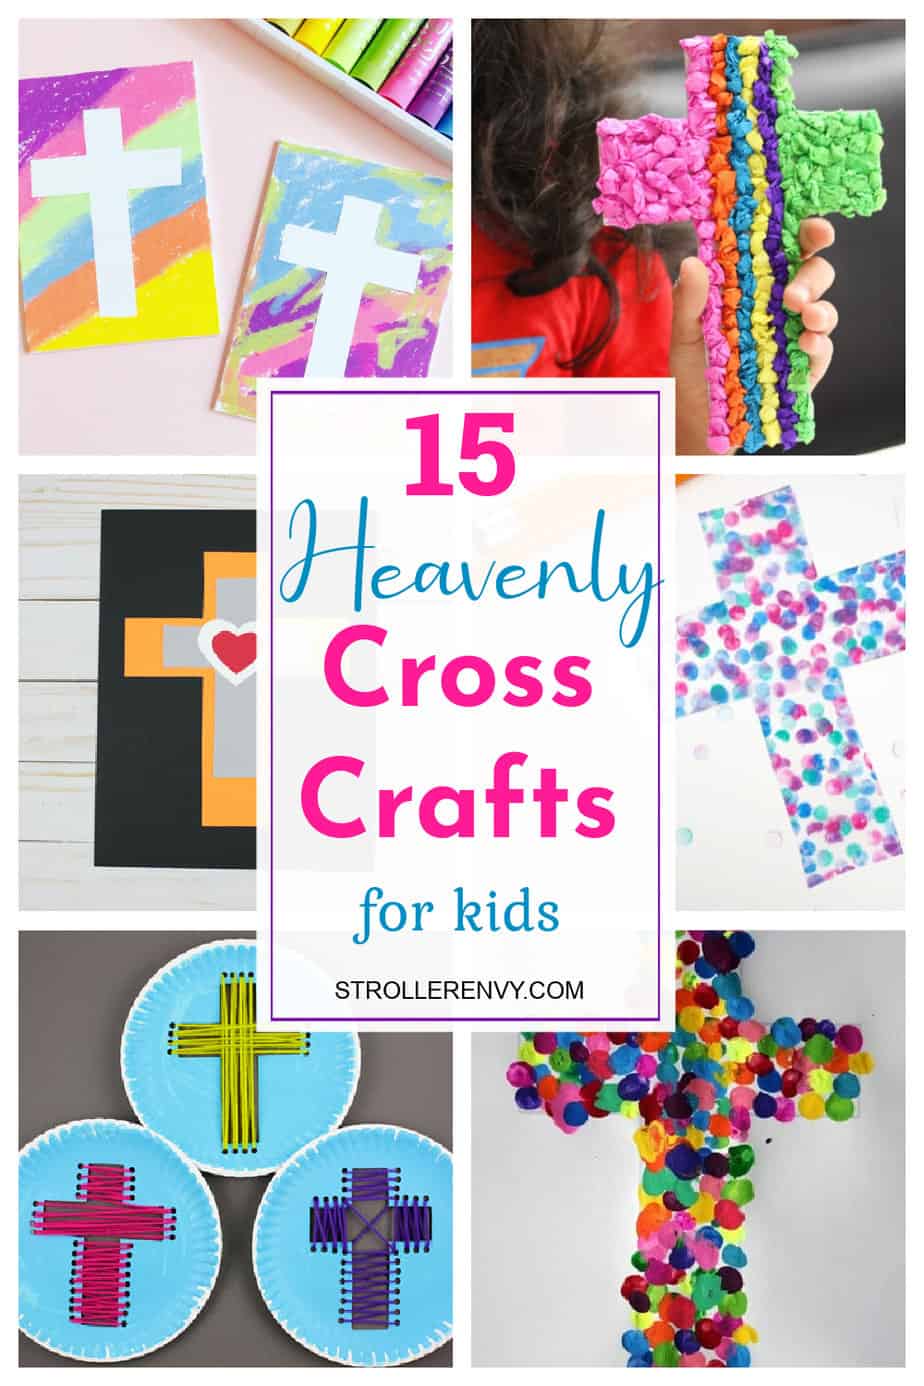 Cross Crafts for Kids